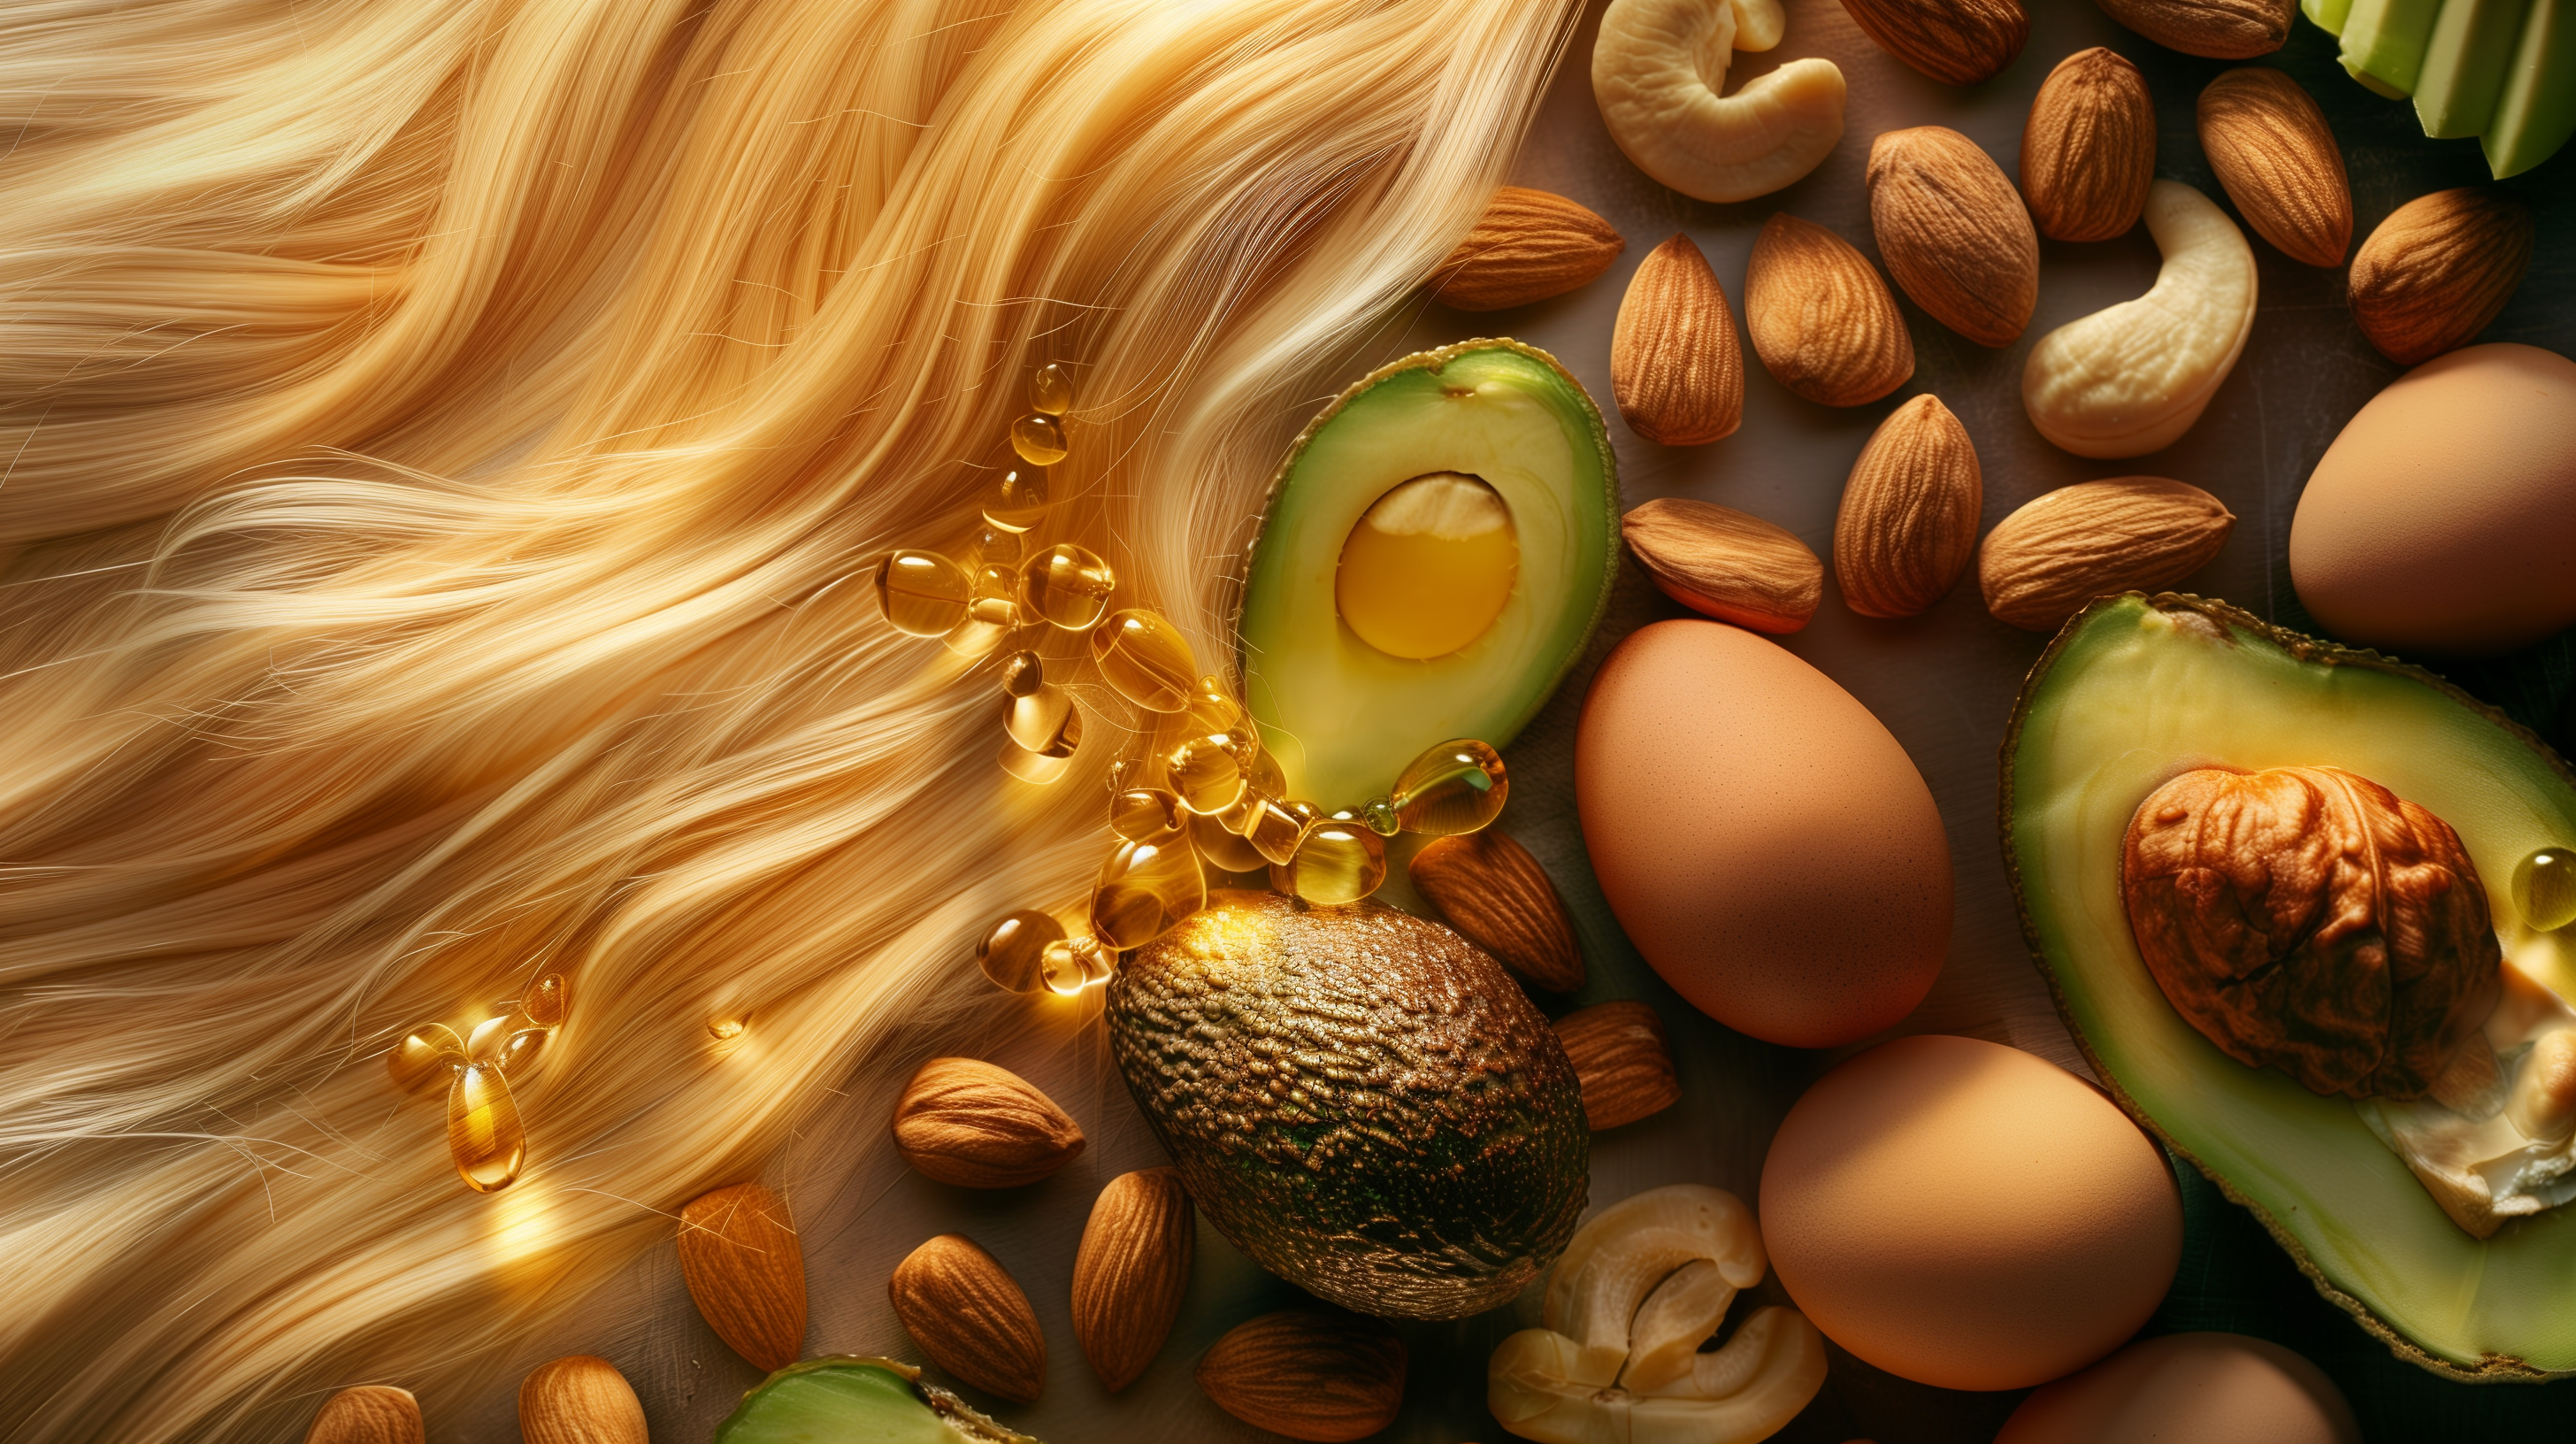 shiny hair strand surrounded by vibrant, natural foods rich in biotin like nuts, eggs, and avocados